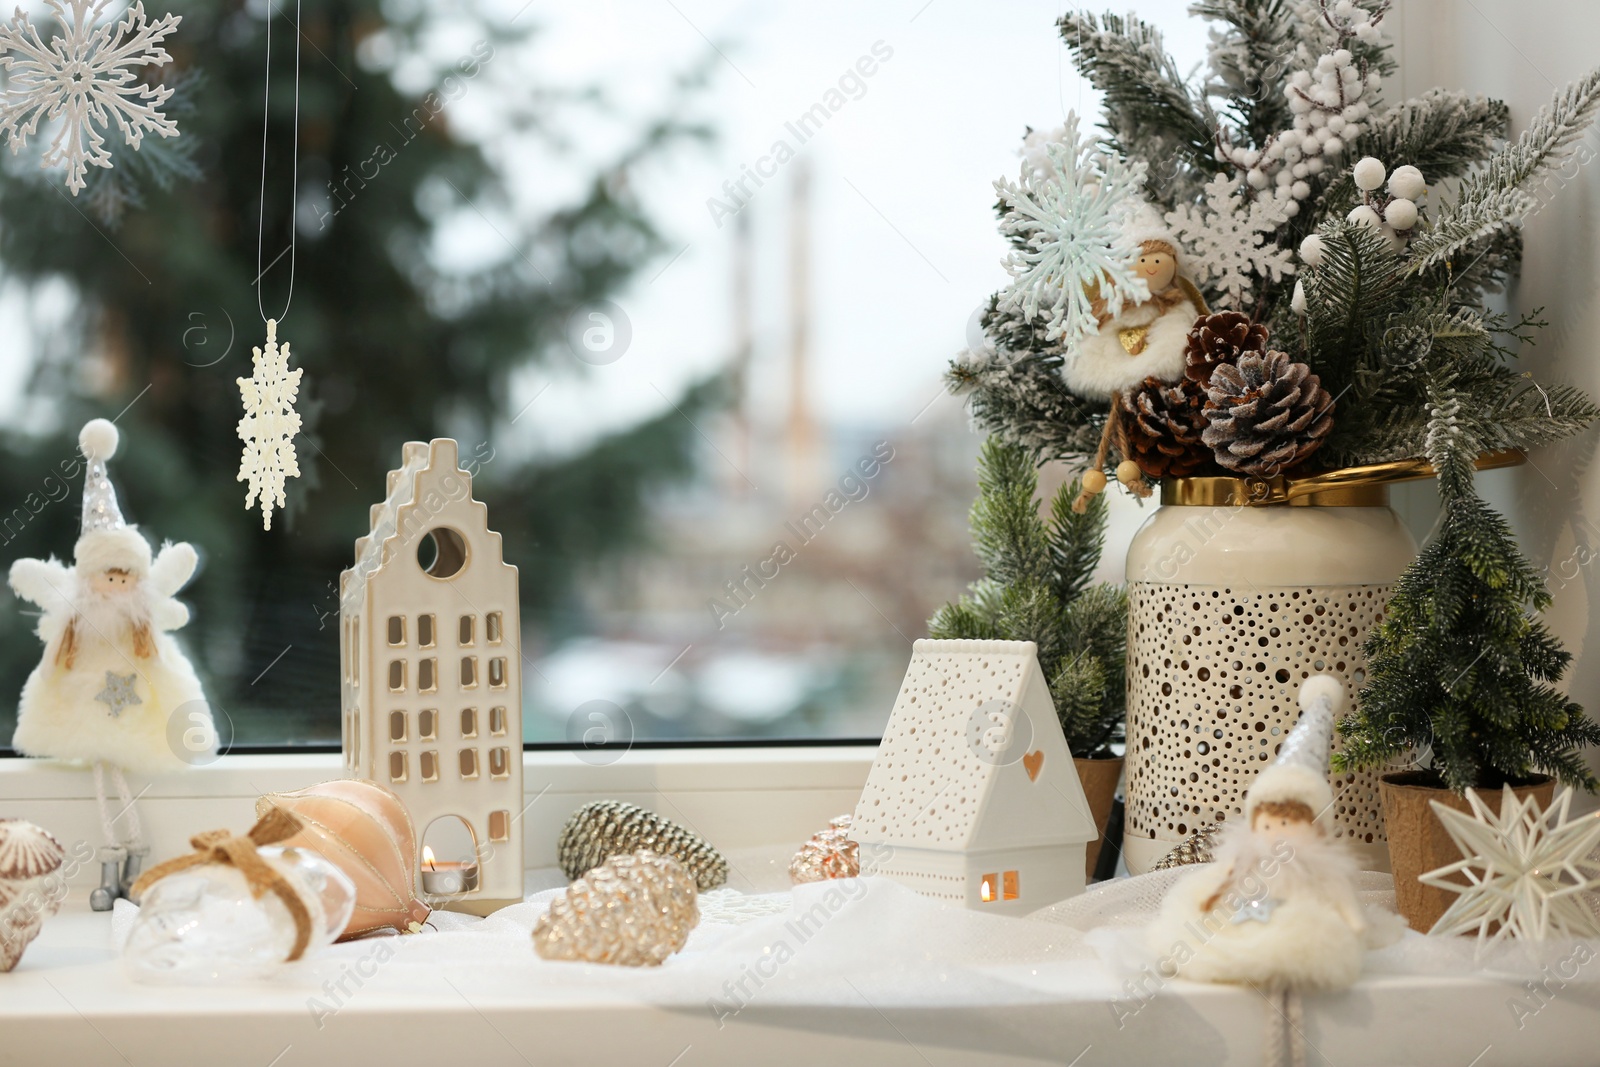 Photo of Many beautiful Christmas decorations and fir branches on window sill indoors